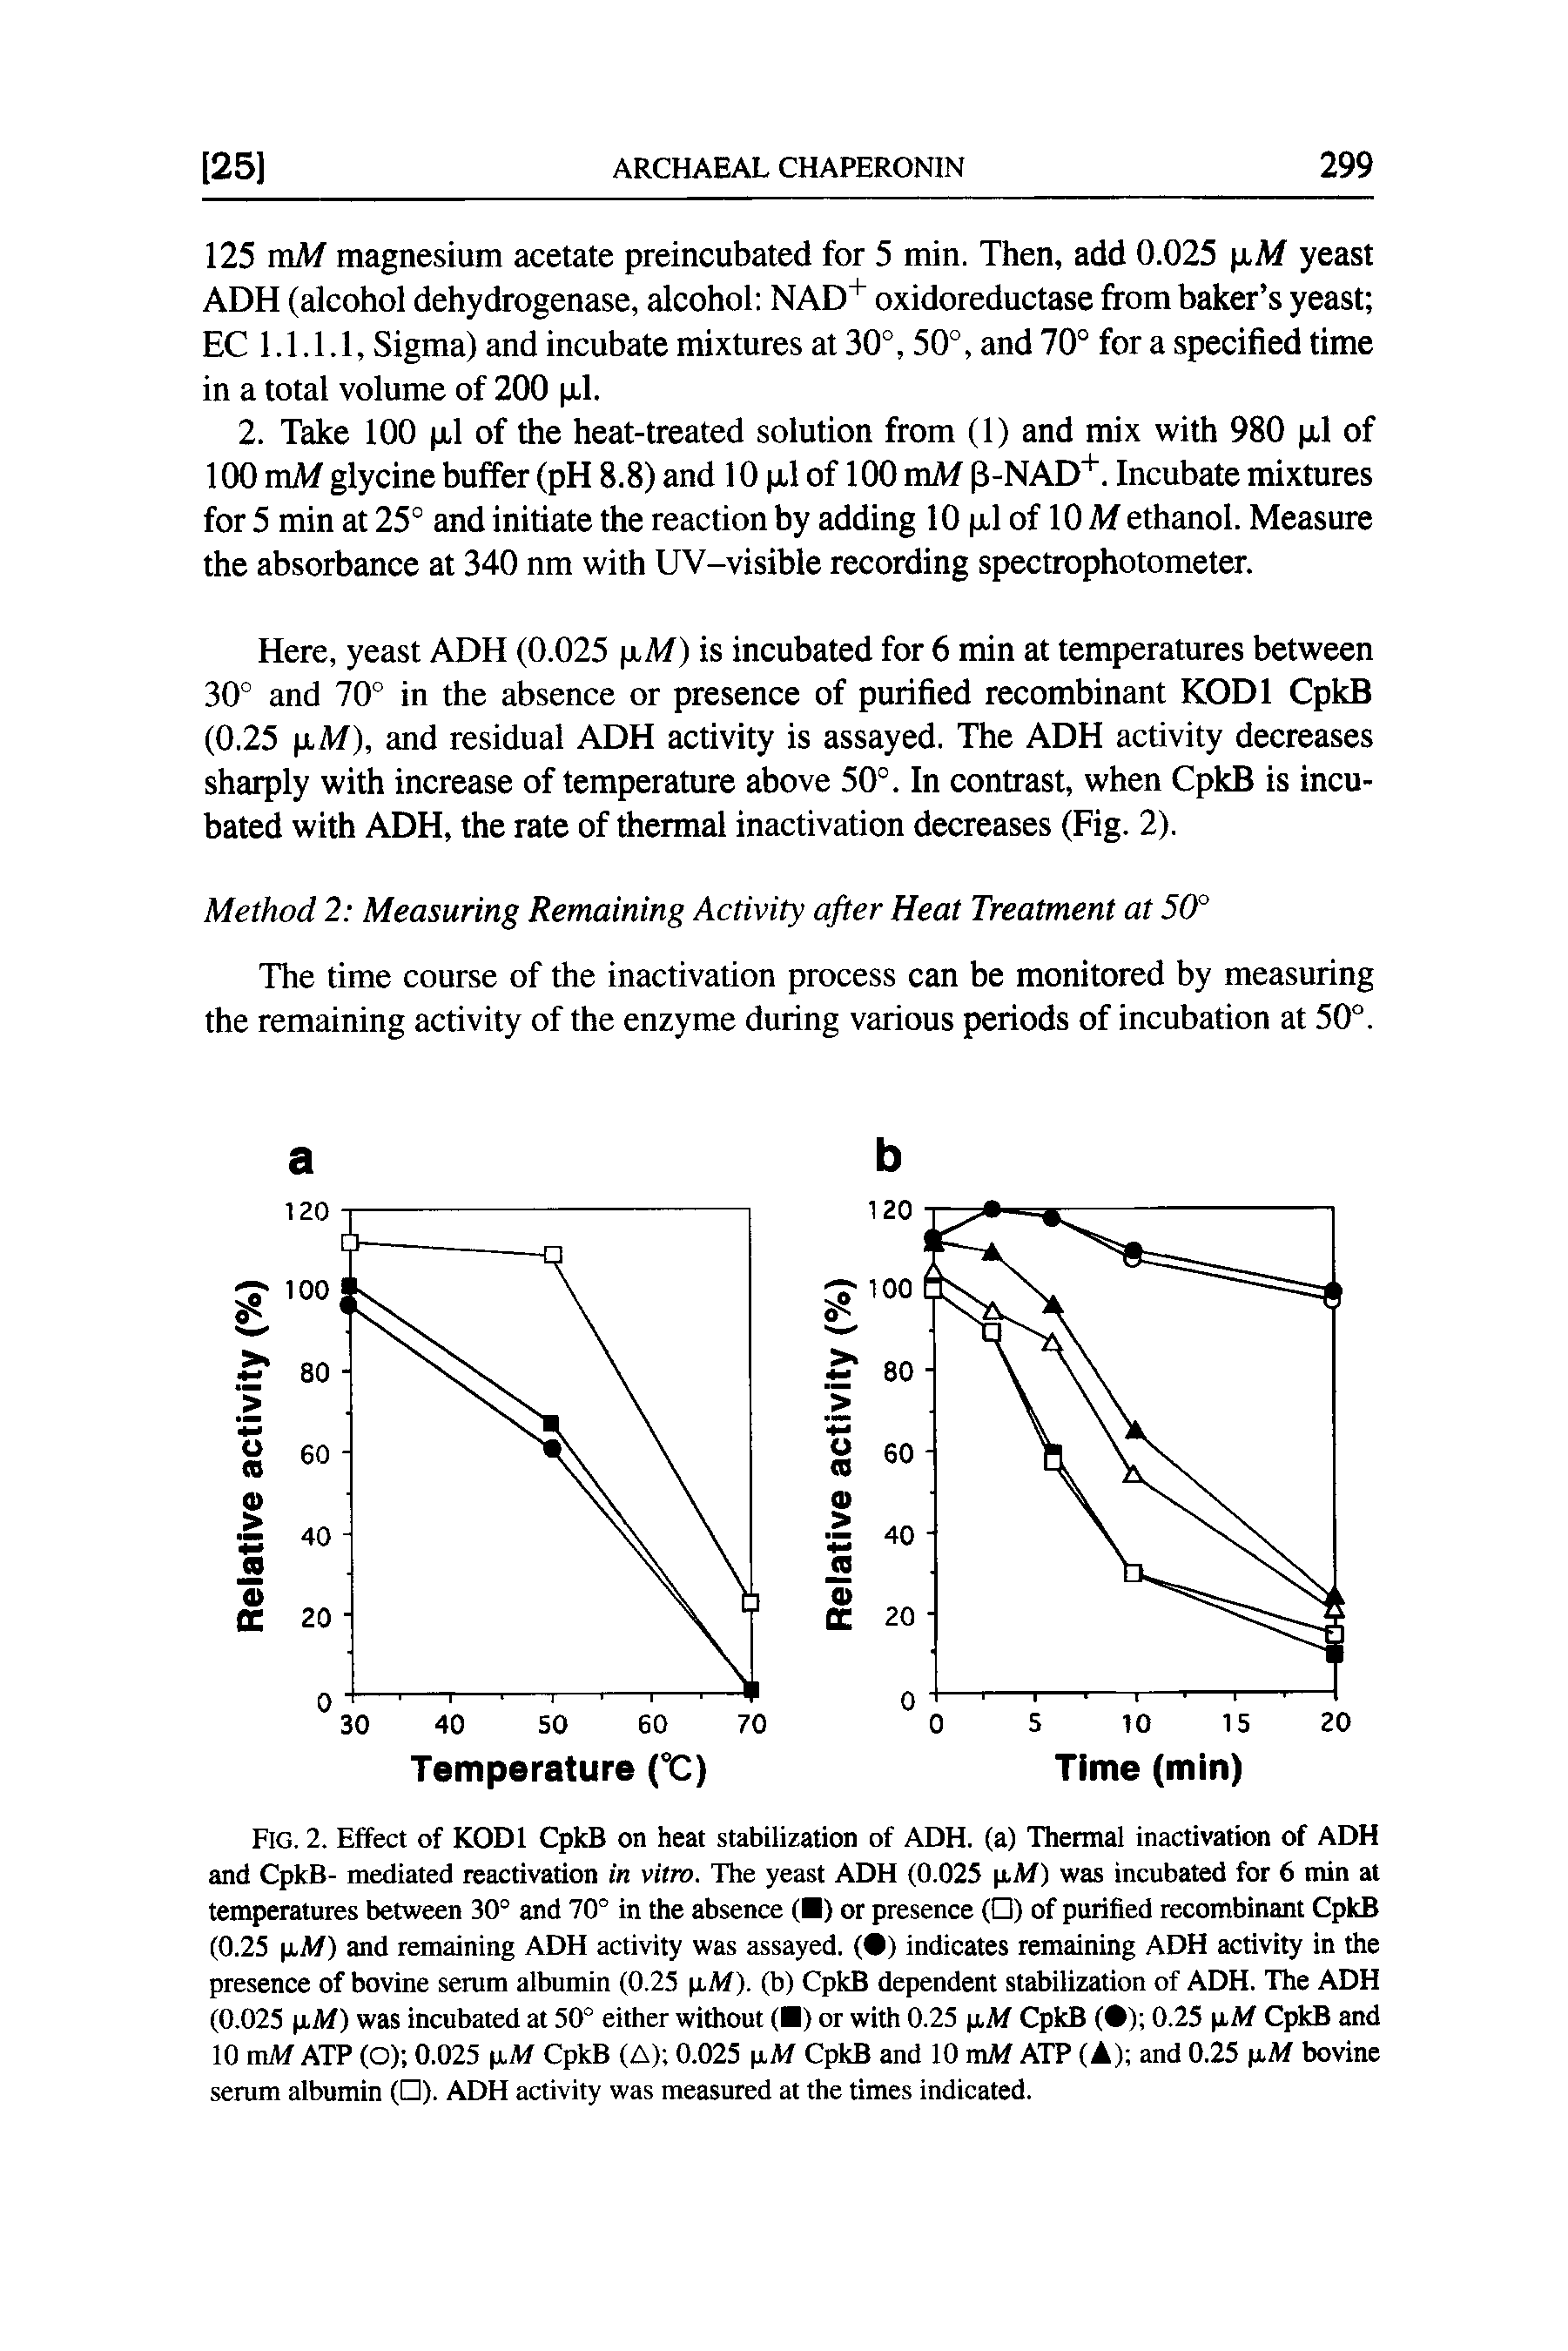 Fig. 2. Effect of KODl CpkB on heat stabilization of ADH. (a) Thermal inactivation of ADH and CpkB- mediated reactivation in vitro. The yeast ADH (0.025 p.M) was incubated for 6 min at temperatures between 30° and 70° in the absence ( ) or presence ( ) of purified recombinant CpkB (0.25 p,M) and remaining ADH activity was assayed. ( ) indicates remaining ADH activity in the presence of bovine serum albumin (0.25 p.M). (b) CpkB dependent stabilization of ADH. The ADH (0.025 p.M) was incubated at 50° either without ( ) or with 0.25 p.Af CpkB ( ) 0.25 iM CpkB and 10 mAf ATP (O) 0.025 xAf CpkB (A) 0.025 pAf CpkB and 10 mAf ATP (A) and 0.25 p,Af bovine serum albumin ( ). ADH activity was measured at the times indicated.